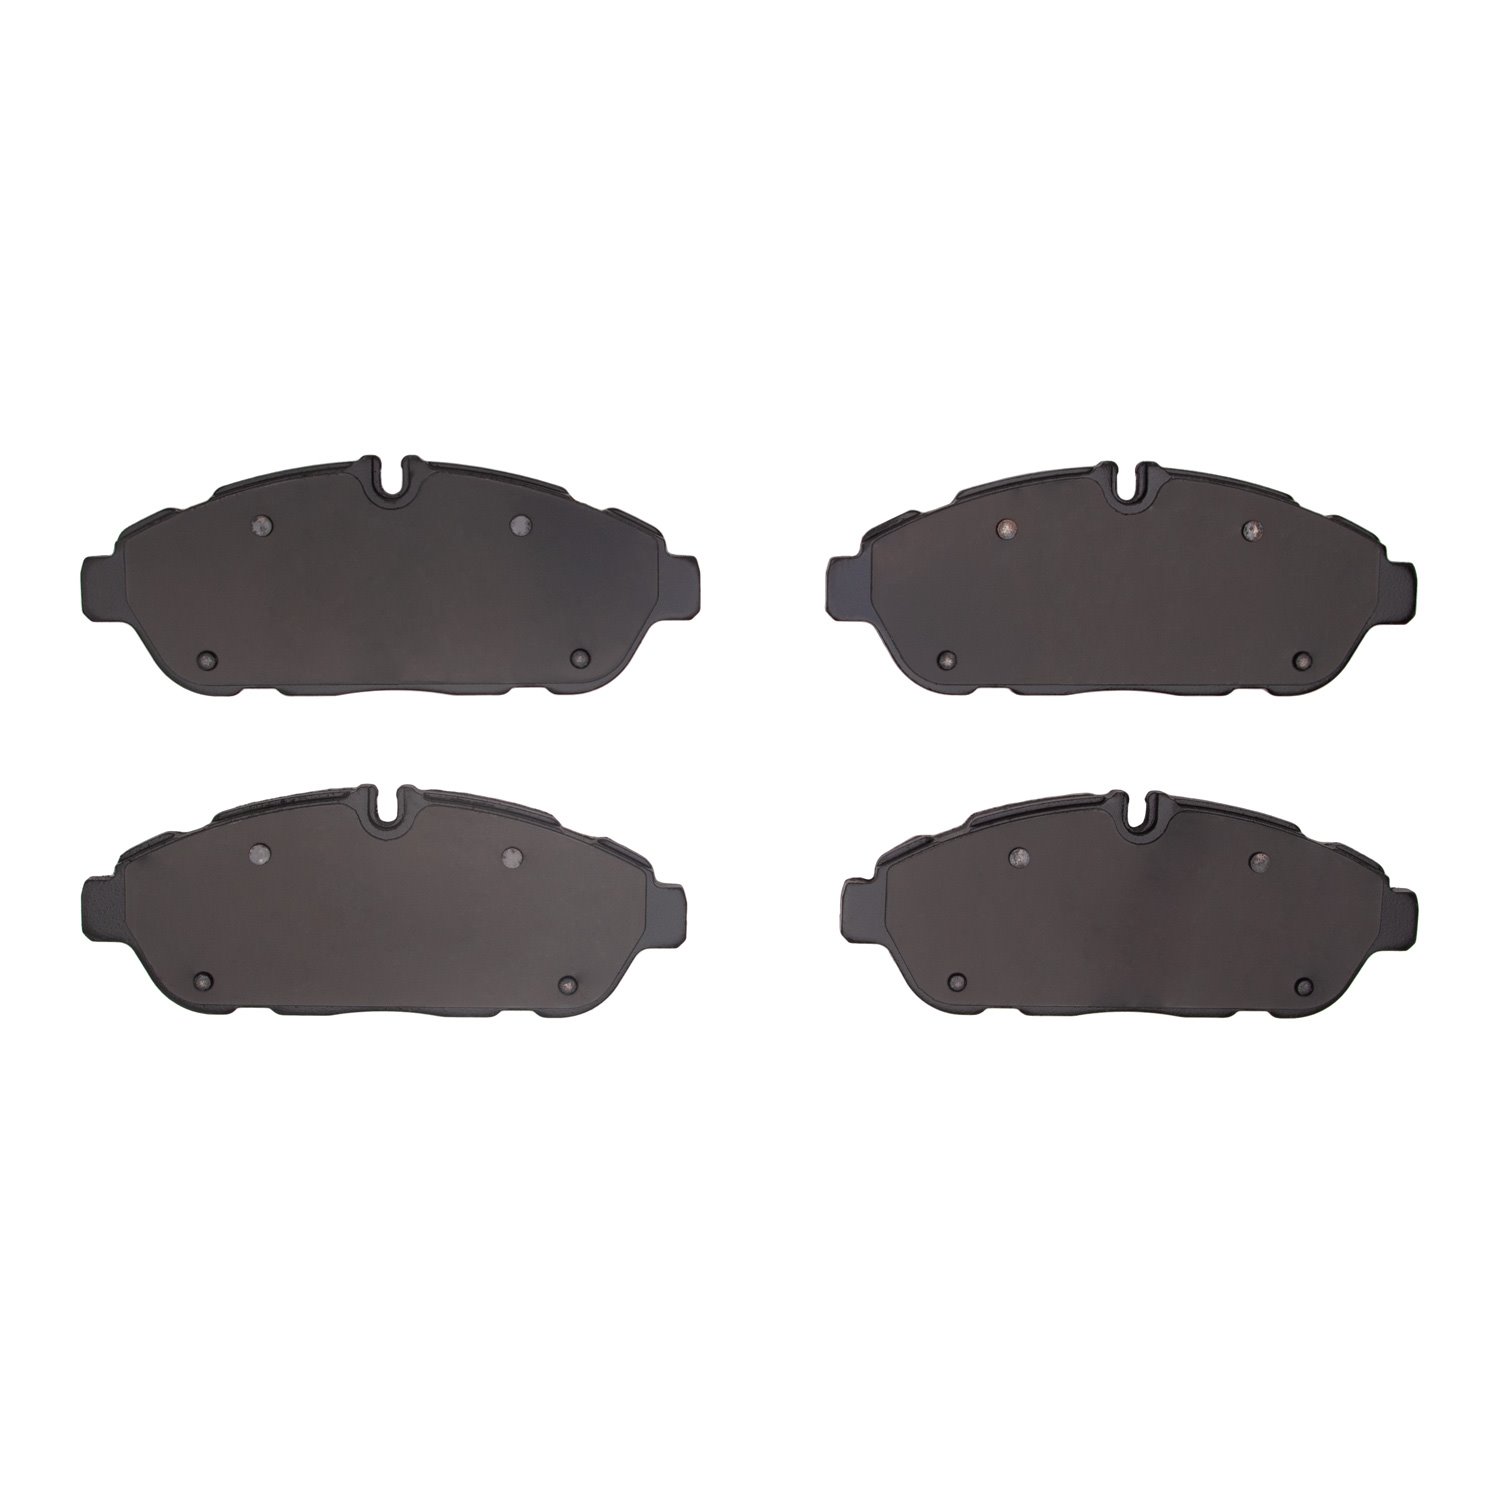 1551-2301-00 5000 Advanced Semi-Metallic Brake Pads, Fits Select Ford/Lincoln/Mercury/Mazda, Position: Front